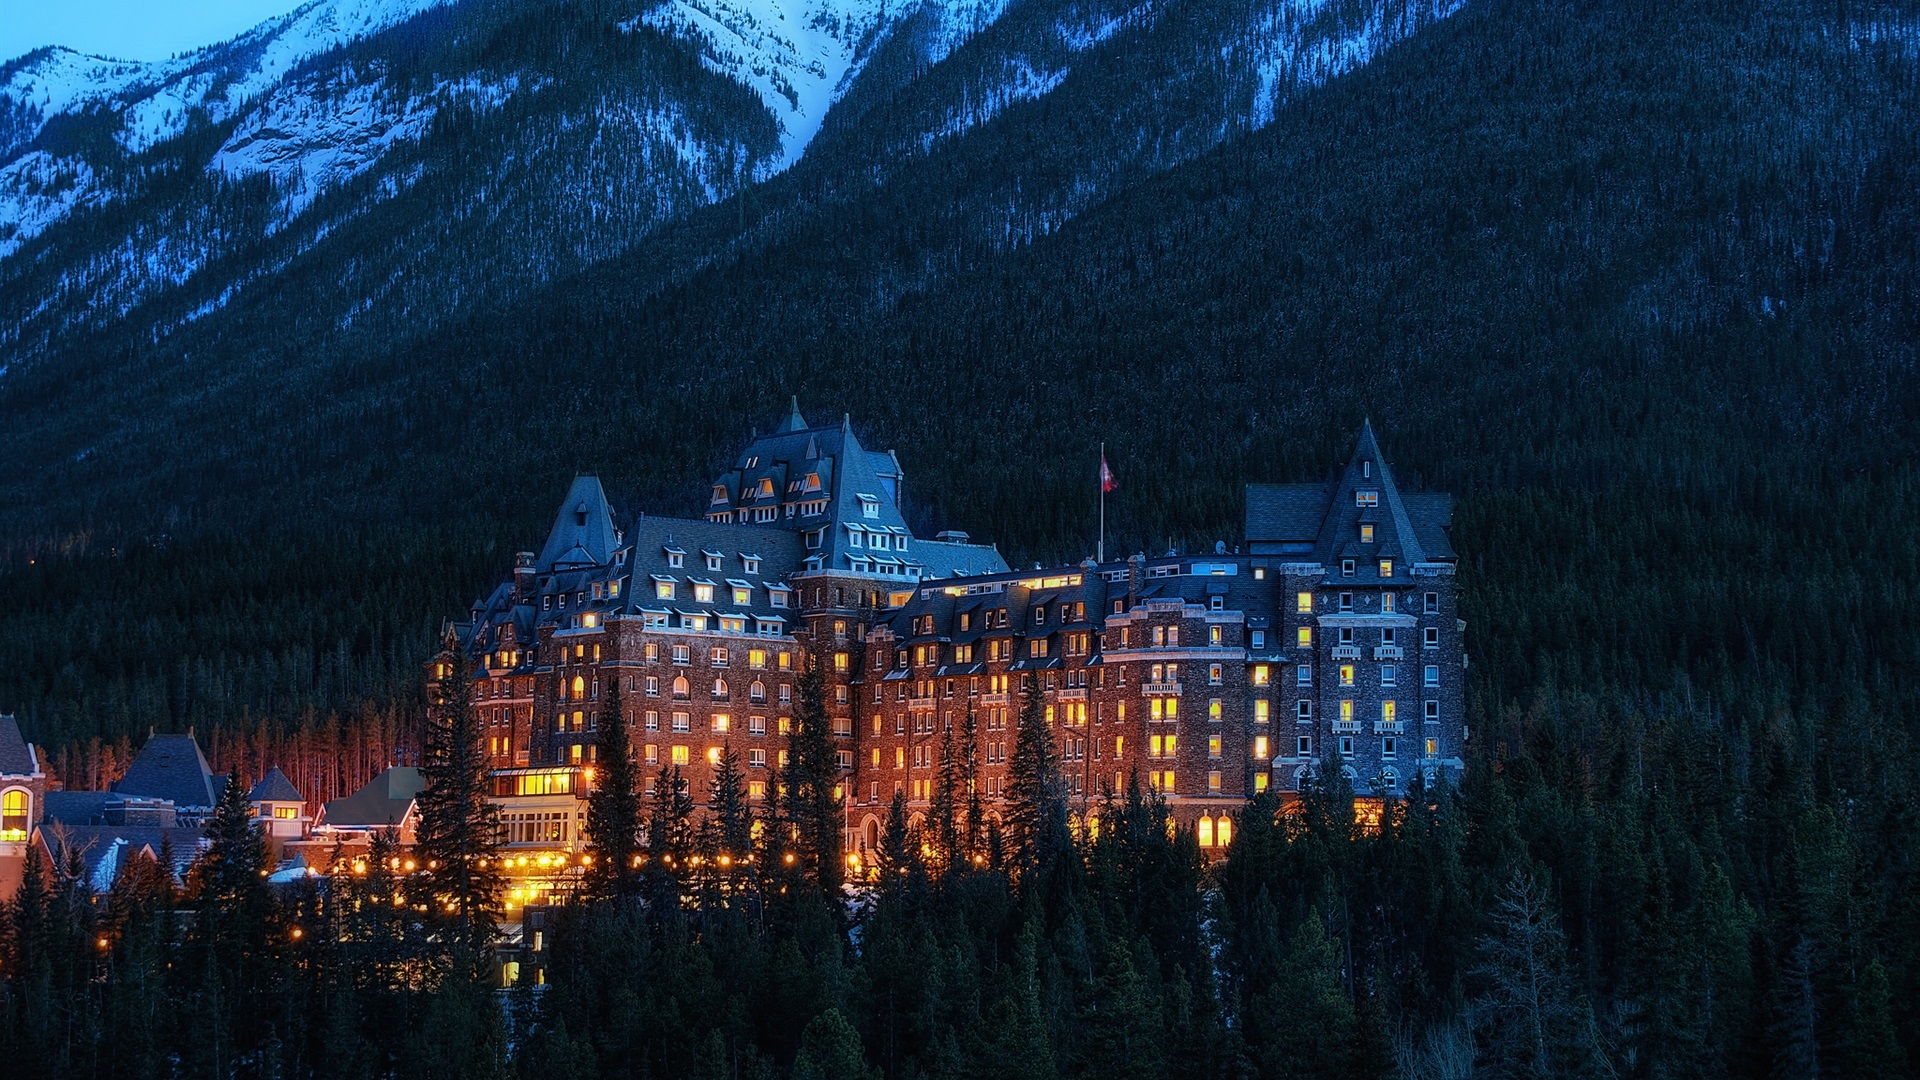 General 1920x1080 Canada Alberta National Park forest mountains trees evening building snow lights Banff Fairmont Banff Springs Fairmont Banff Springs Hotel hotel